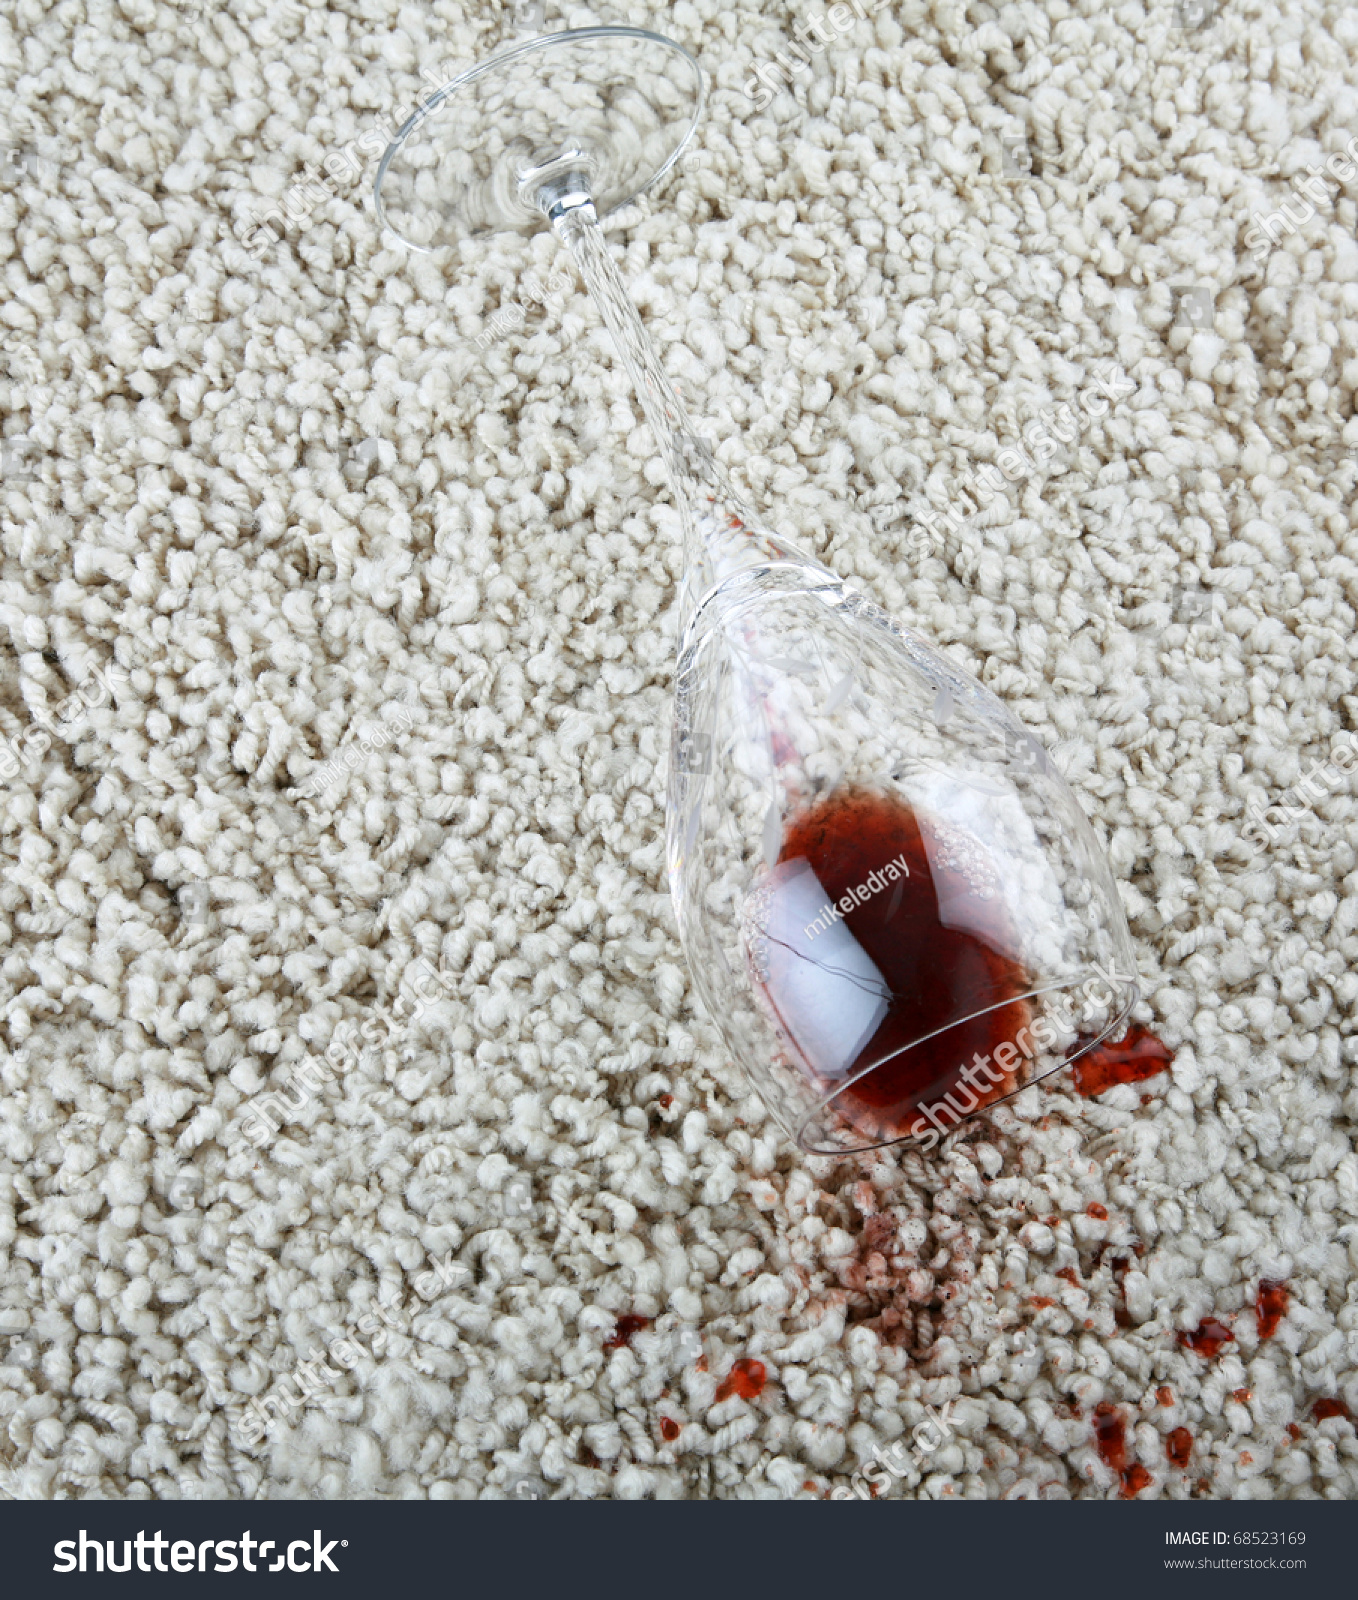 A Cut Crystal Wine Glass Full Of Red Wine Spilled On A Off White Carpet Leaving A Stain Stock